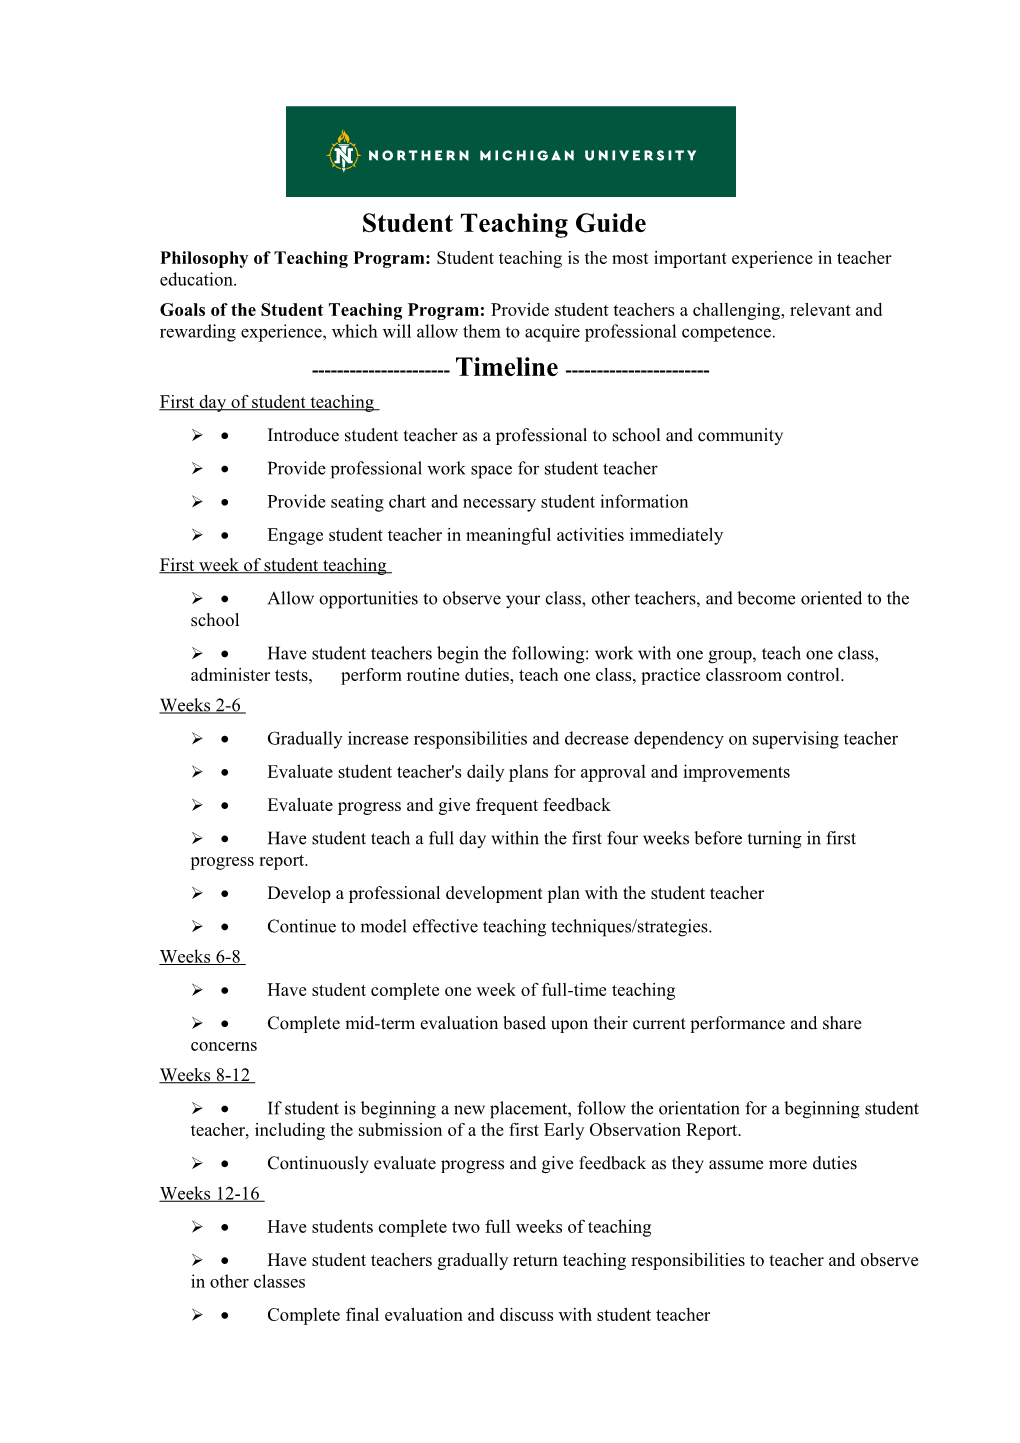 Philosophy of Teaching Program: Student Teaching Is the Most Important Experience in Teacher